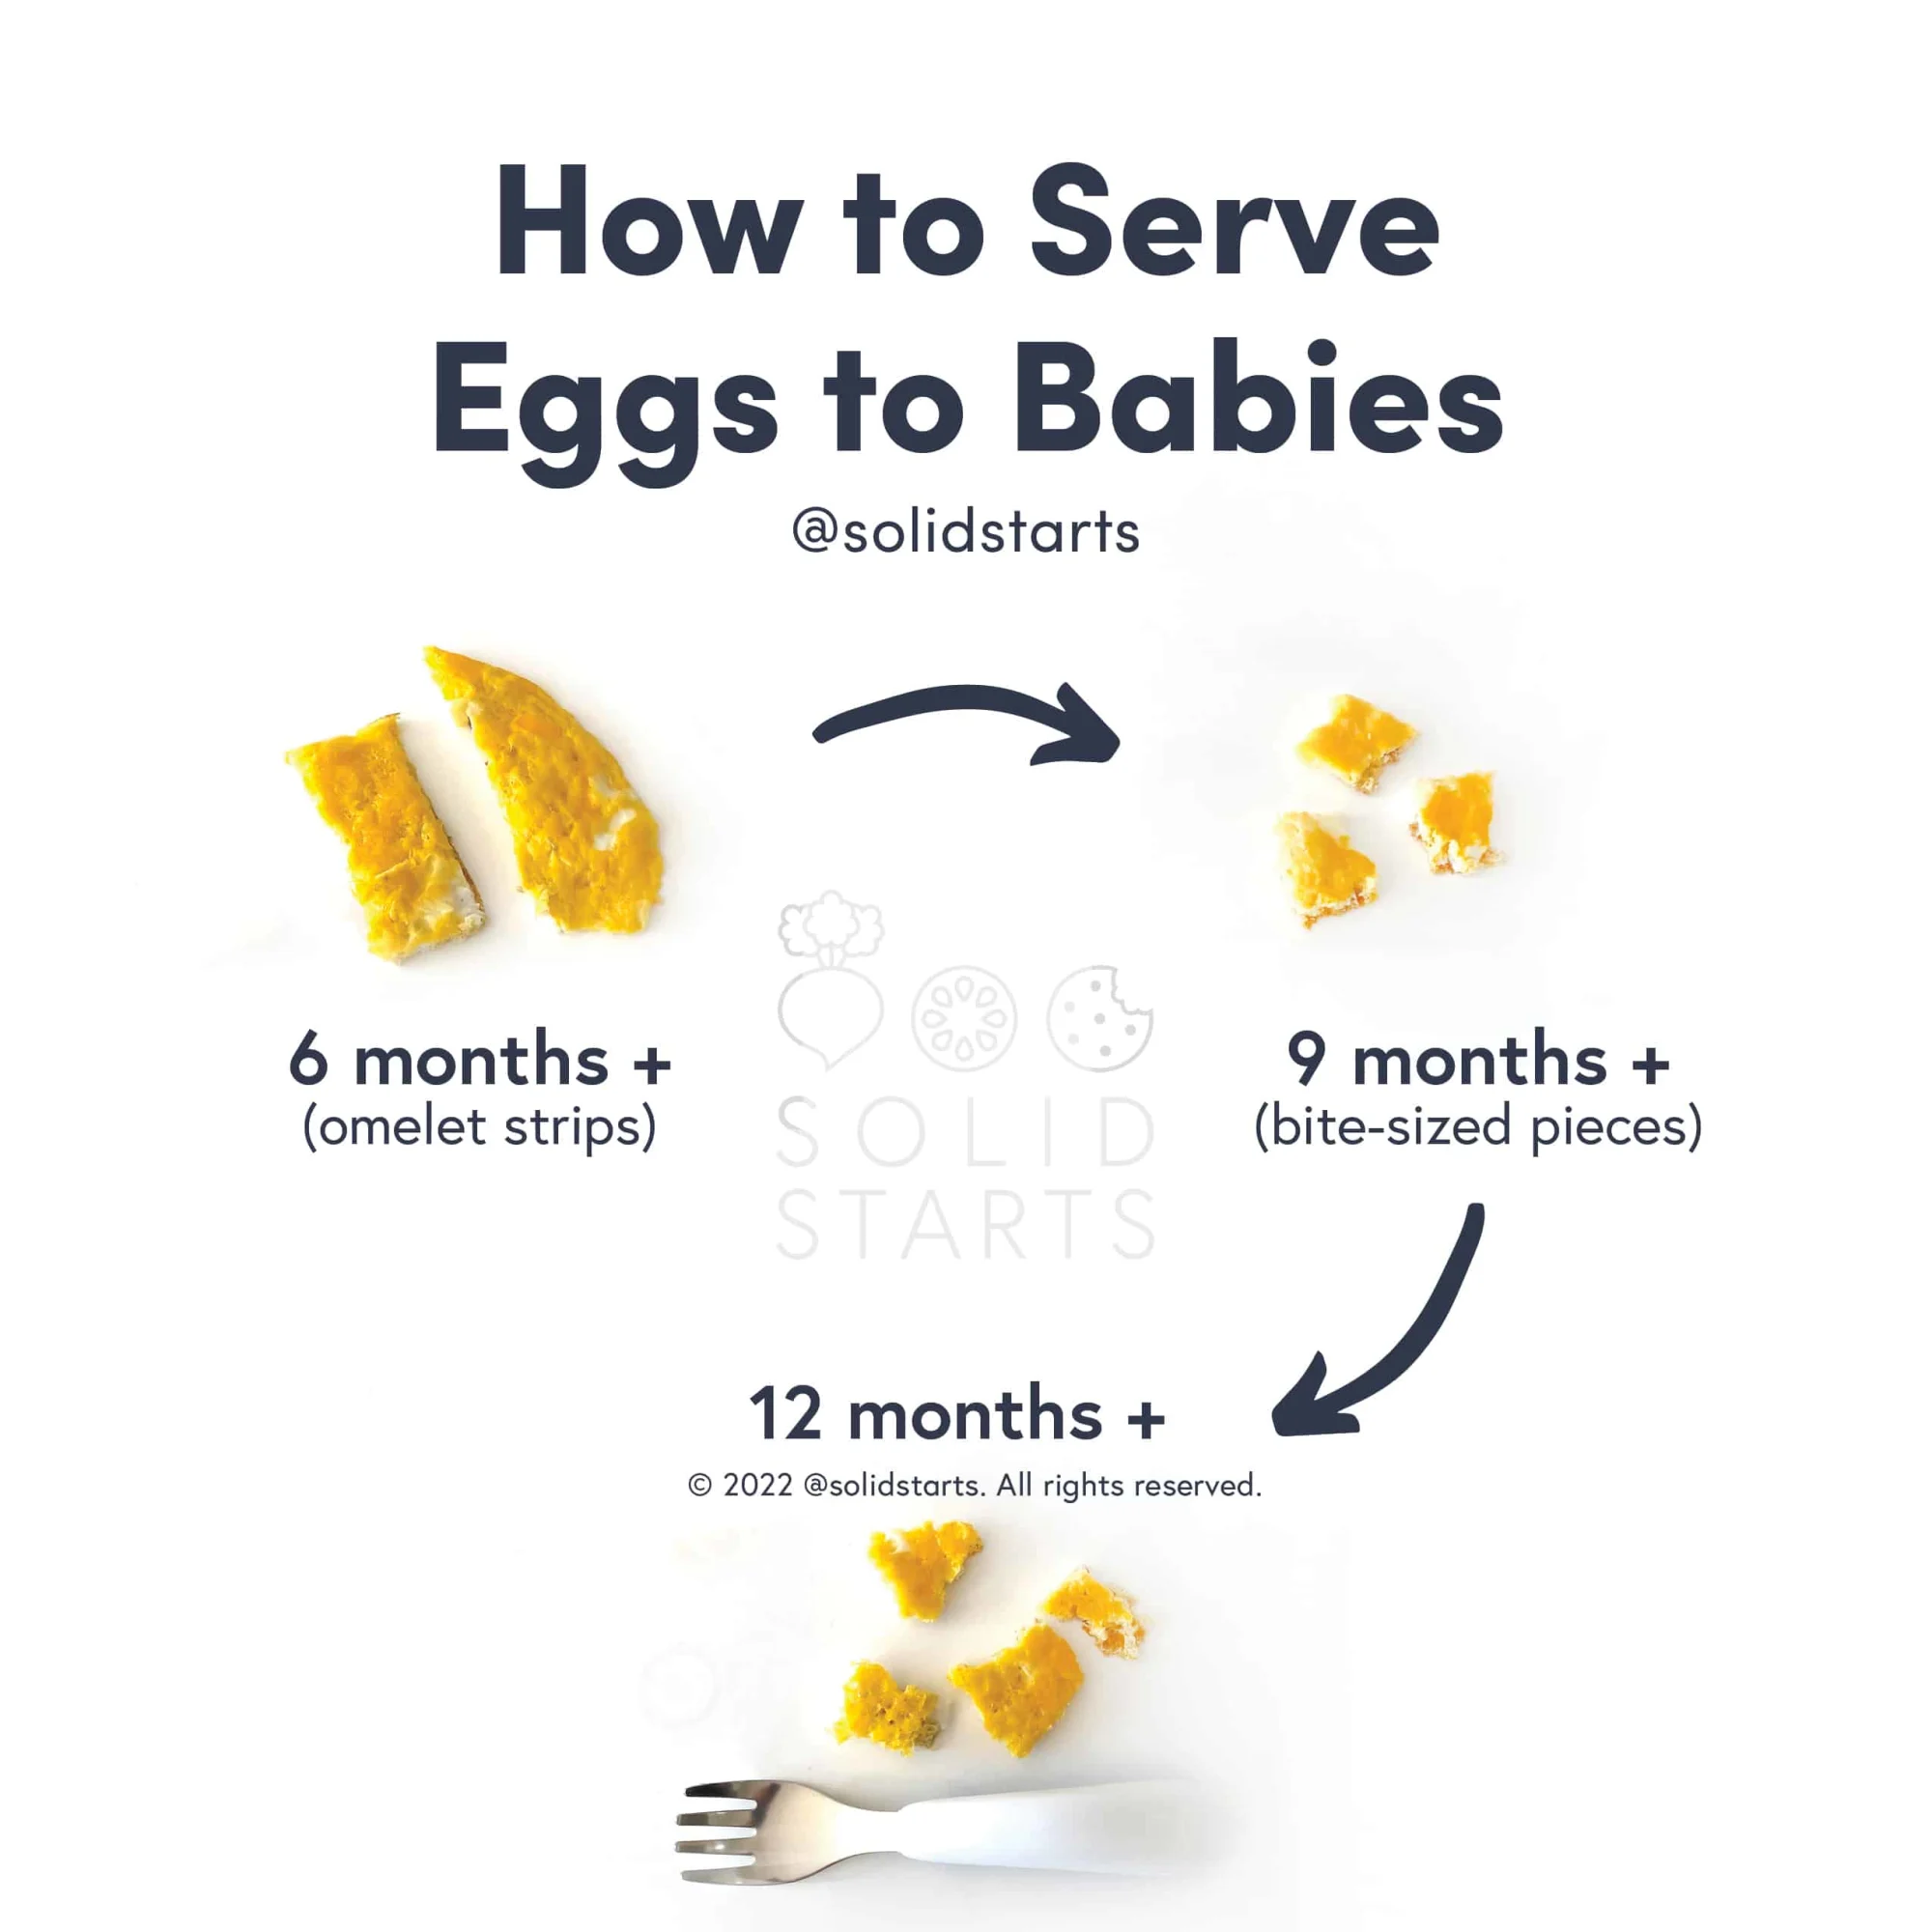 an infographic with the header "how to serve eggs to babies": omelet strips for 6 mos+, bite-sized pieces for 9 mos+, with a fork for 12 mos+